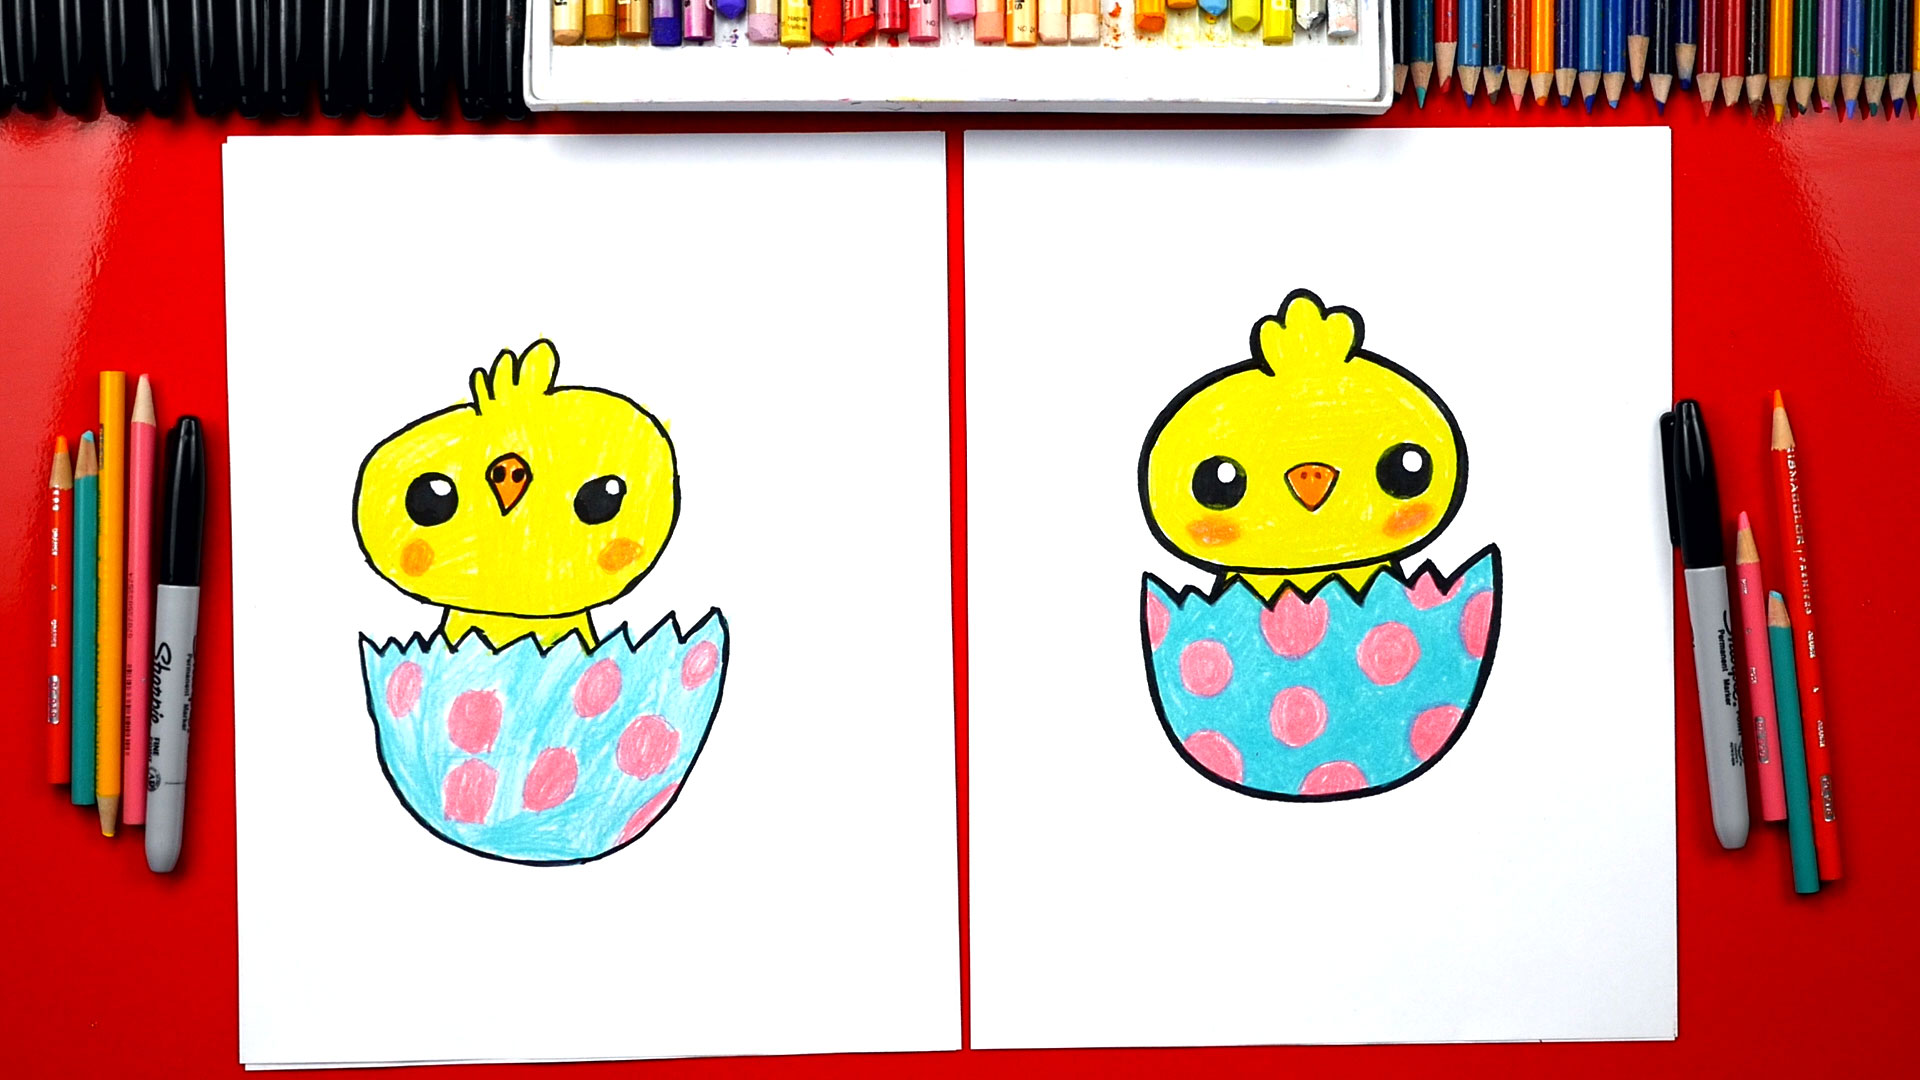 How To Draw Food - How To Draw SpongeBob SquarePants - Art For Kids Hub - Draw along while watching the video or you may use the pictures to practice.